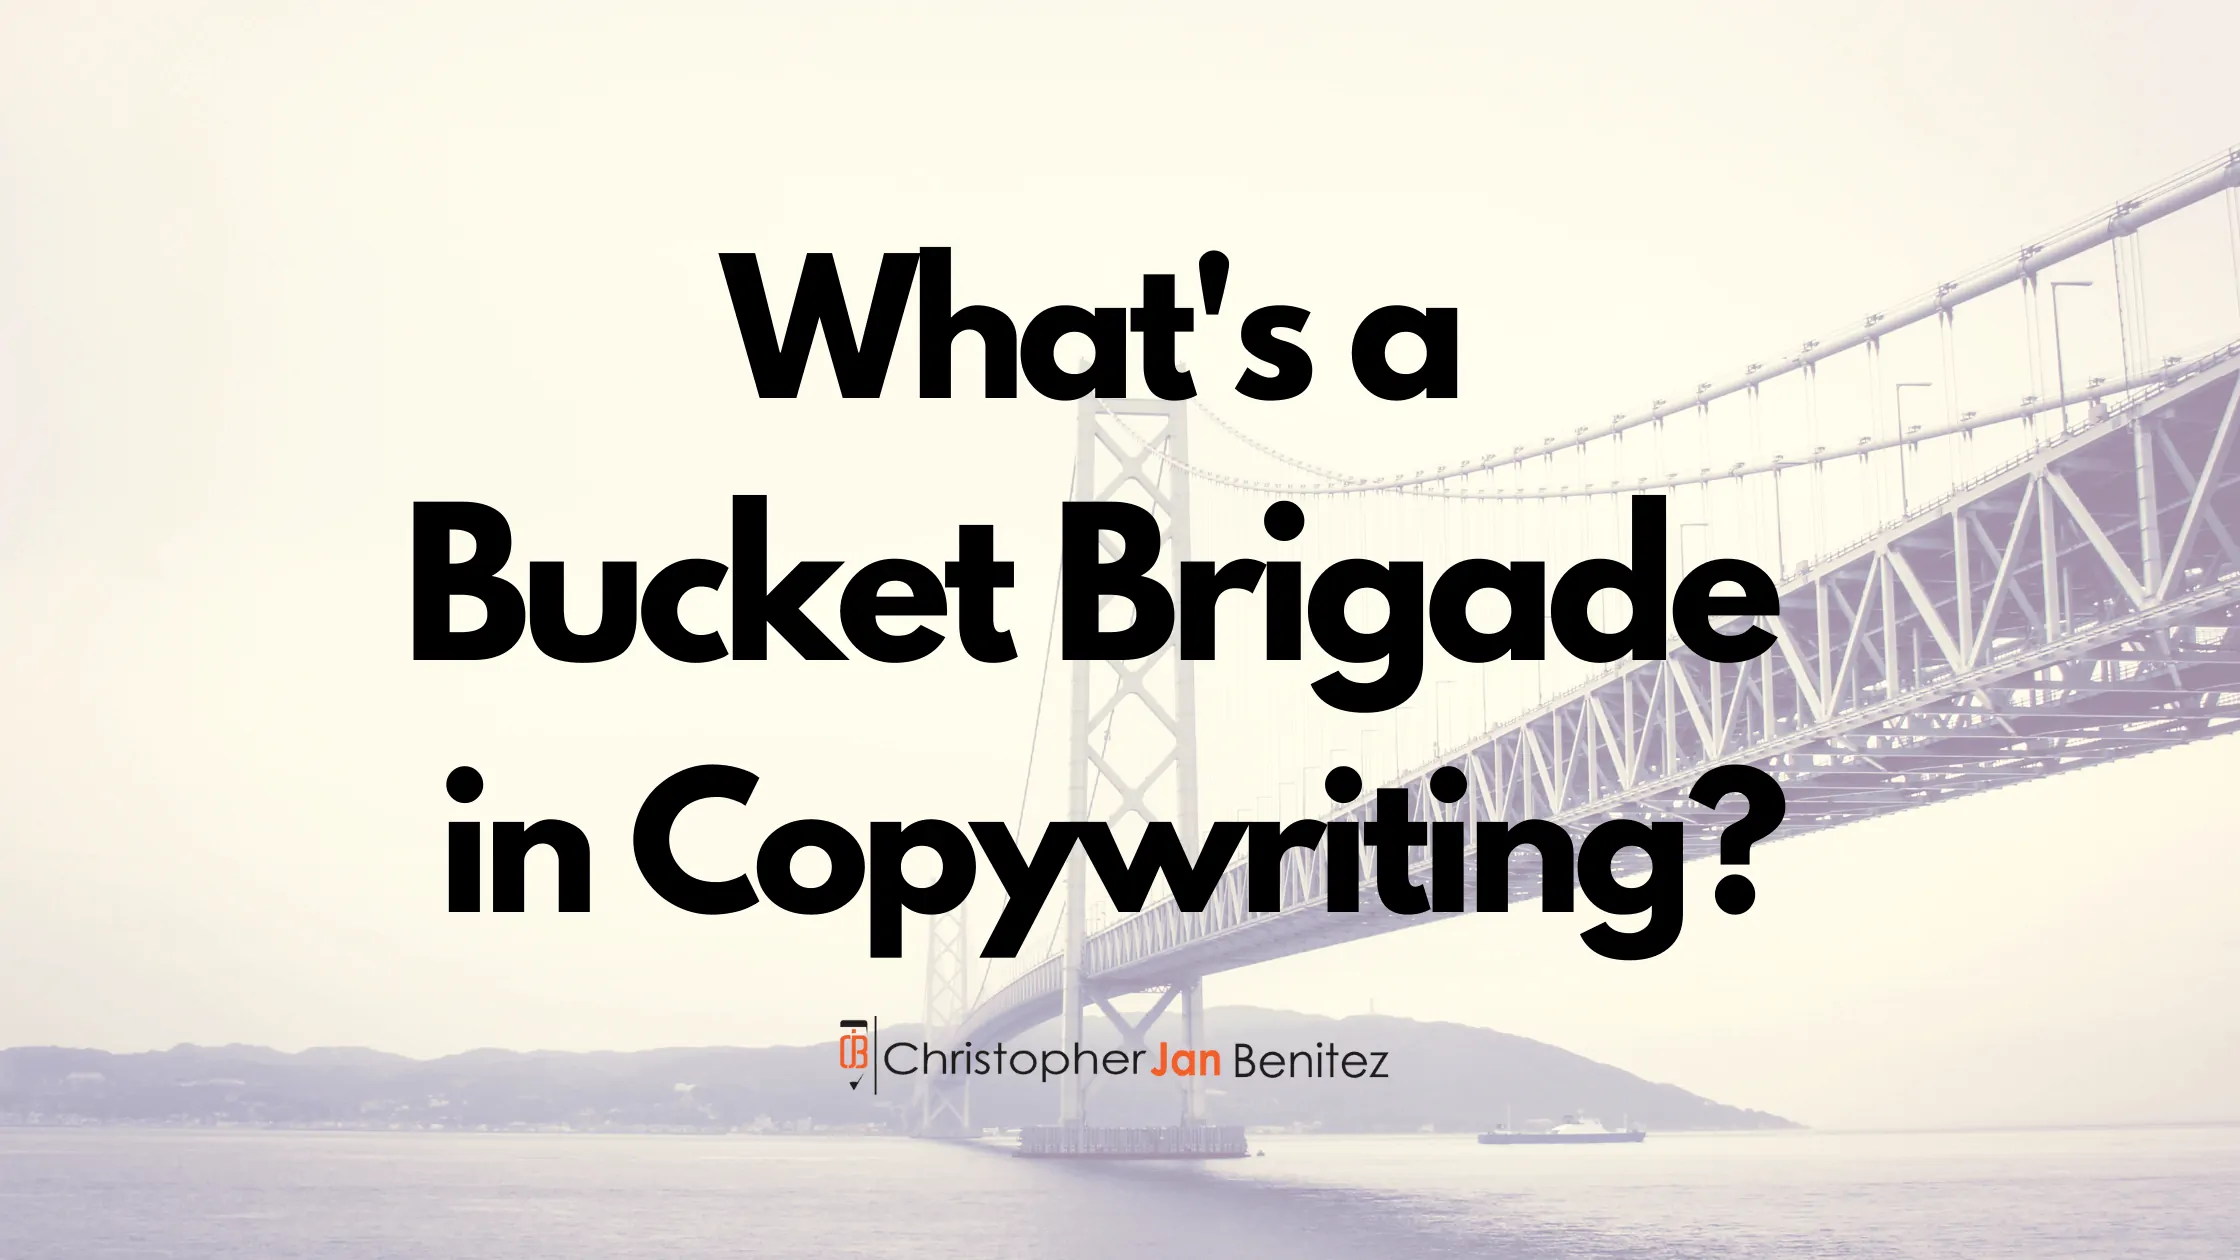 What Is a Bucket Brigade in Copy writing